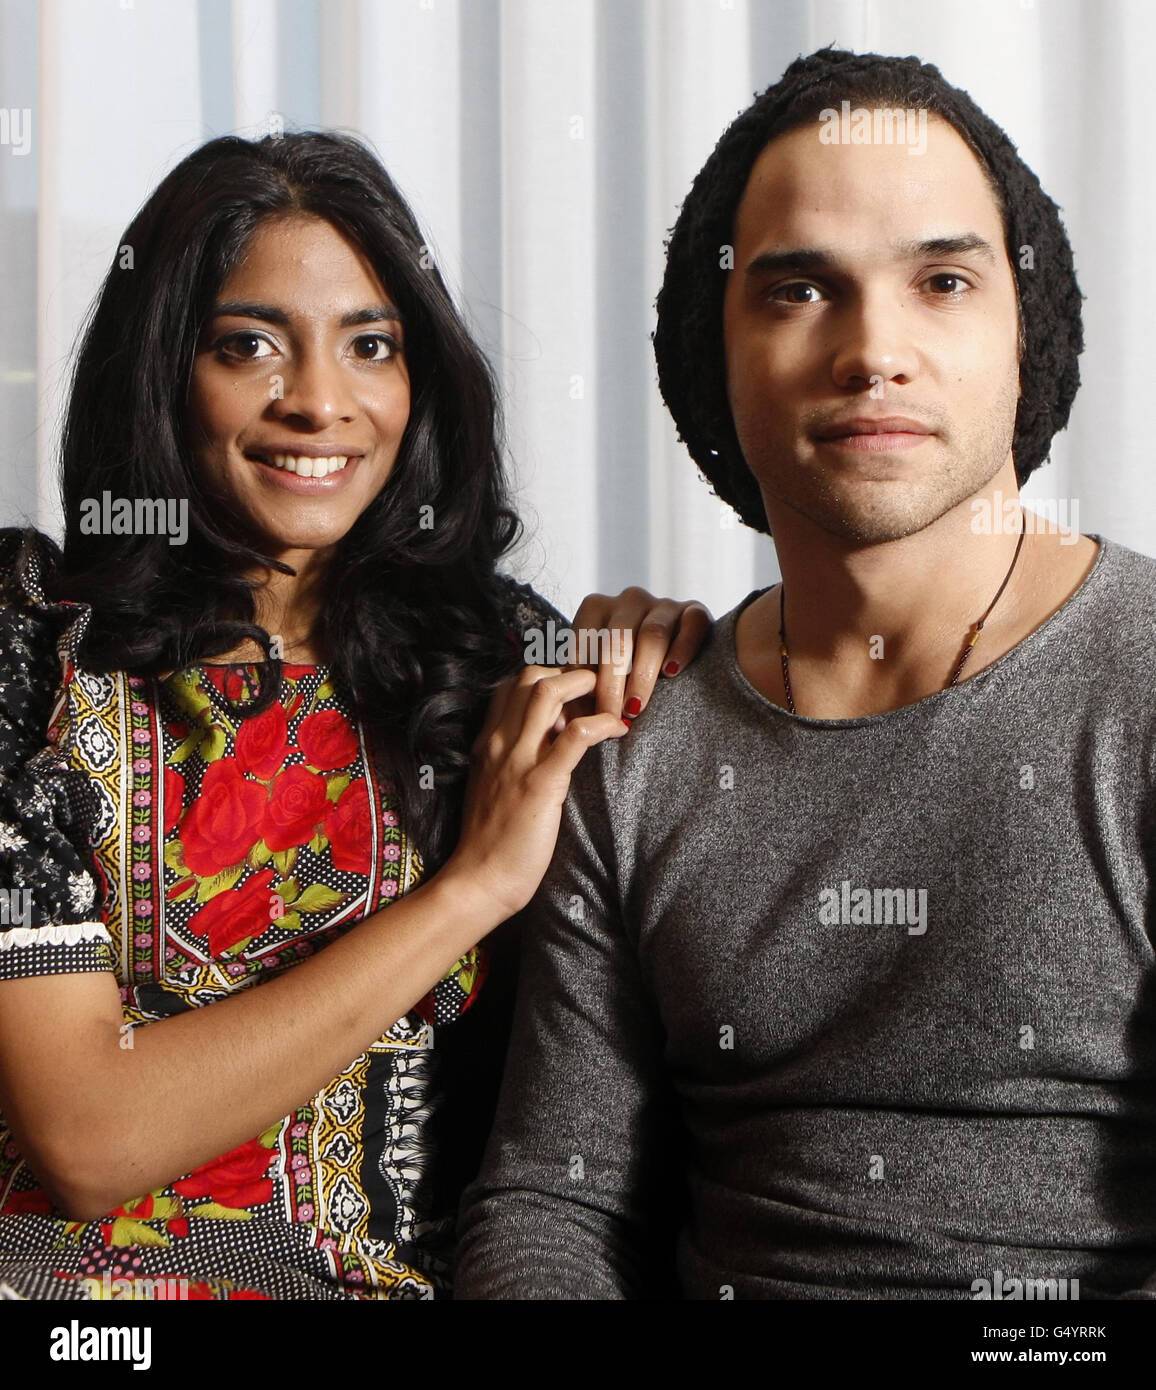 Amara Karan and Reece Ritchie at the Citizen M Hotel in Glasgow, Scotland, to promote their new film All in Good Time. Stock Photo